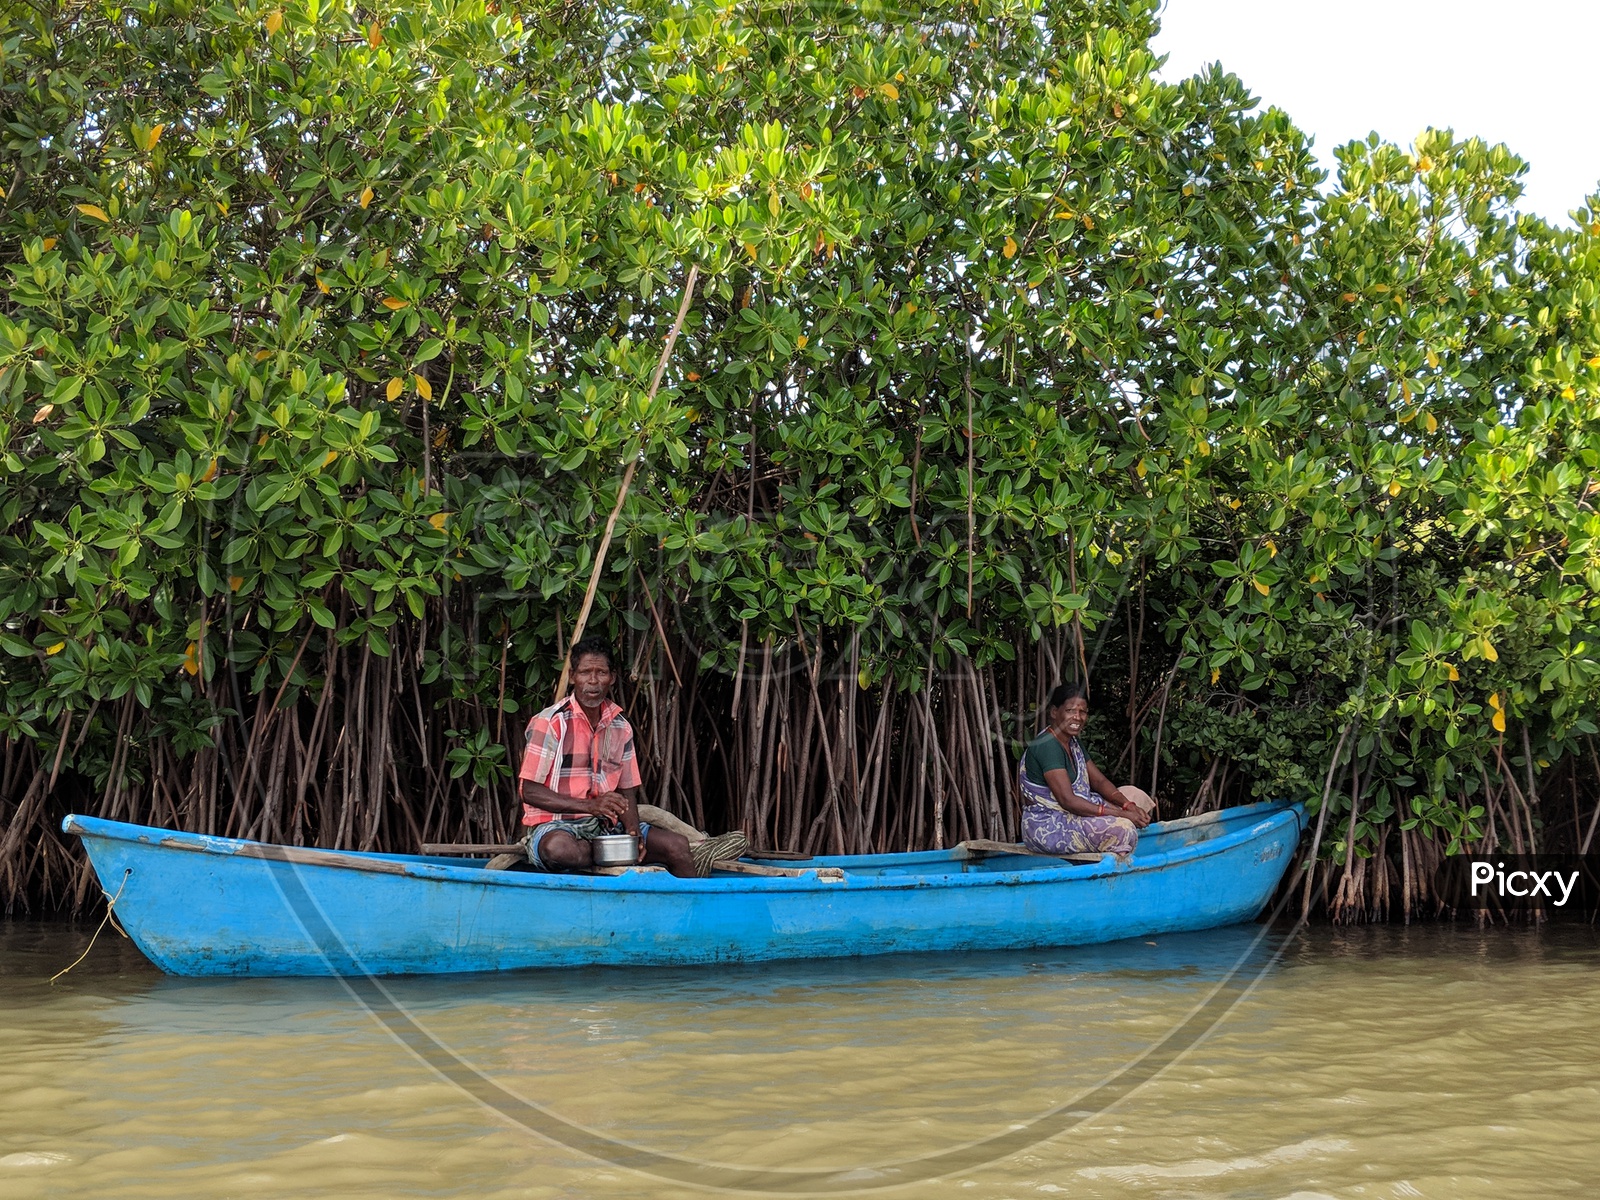 Fisherman in a Boat at Pichavaram Mangrove Forest